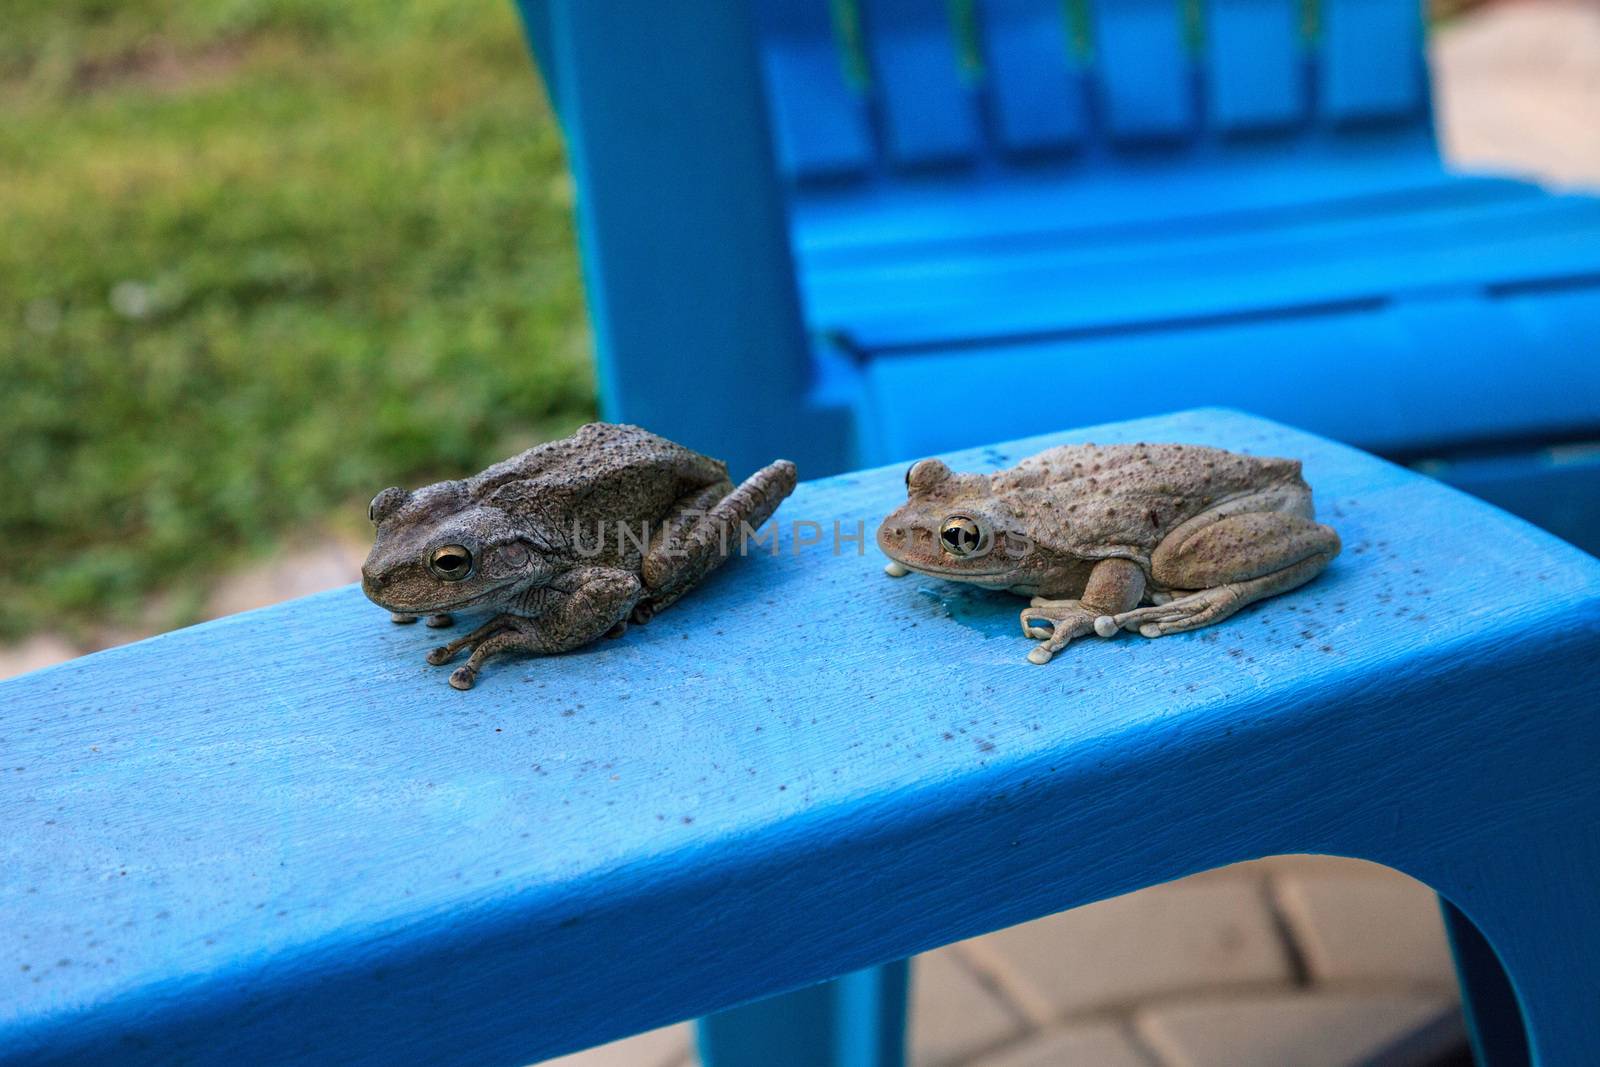 Two Cuban Tree Frogs Osteopilus septentrionalis on a blue chair in tropical Florida.